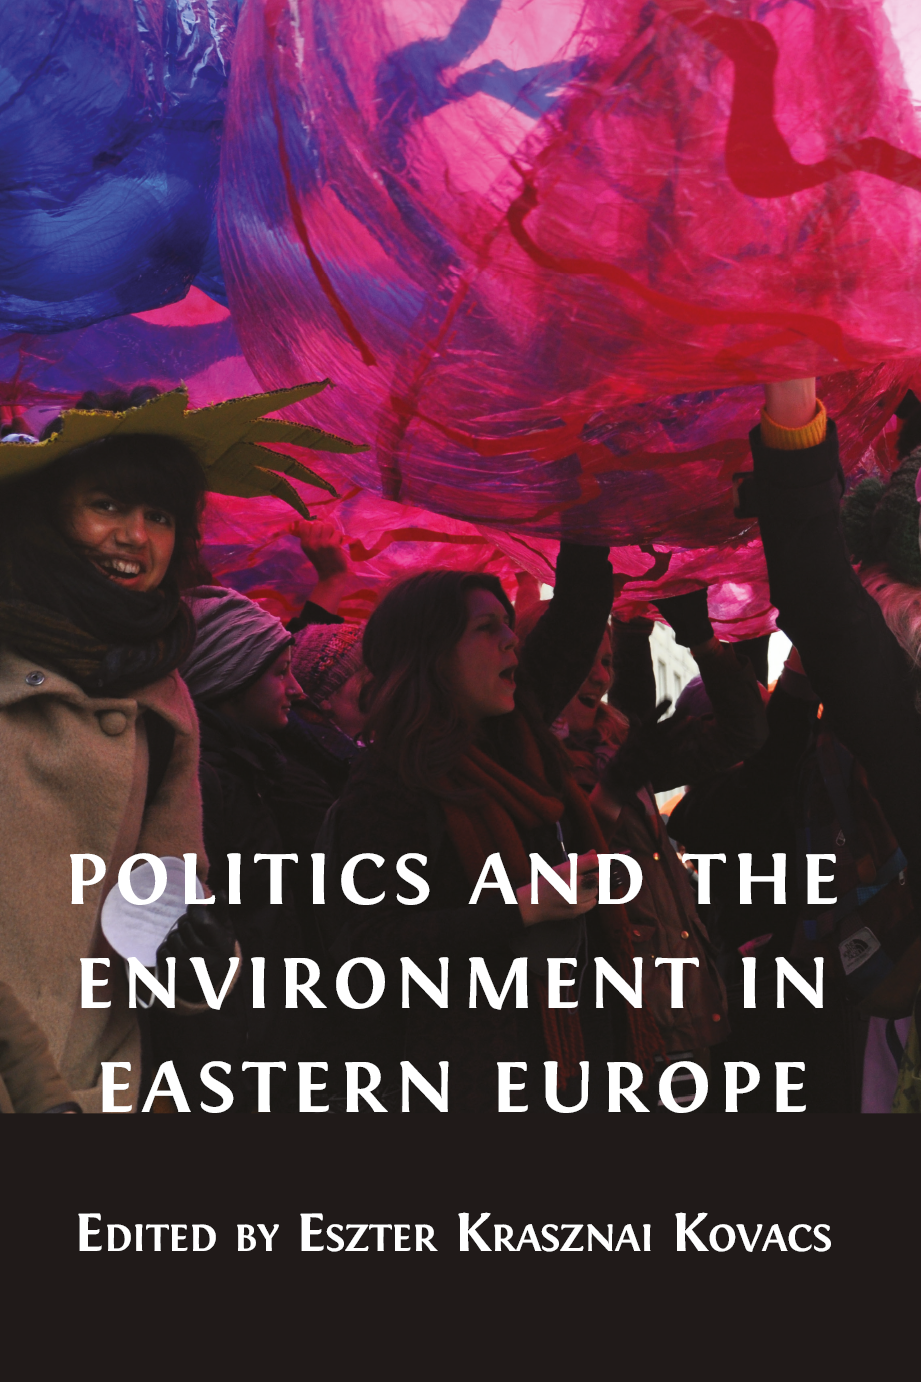 Politics and the Environment in Eastern Europe book cover image